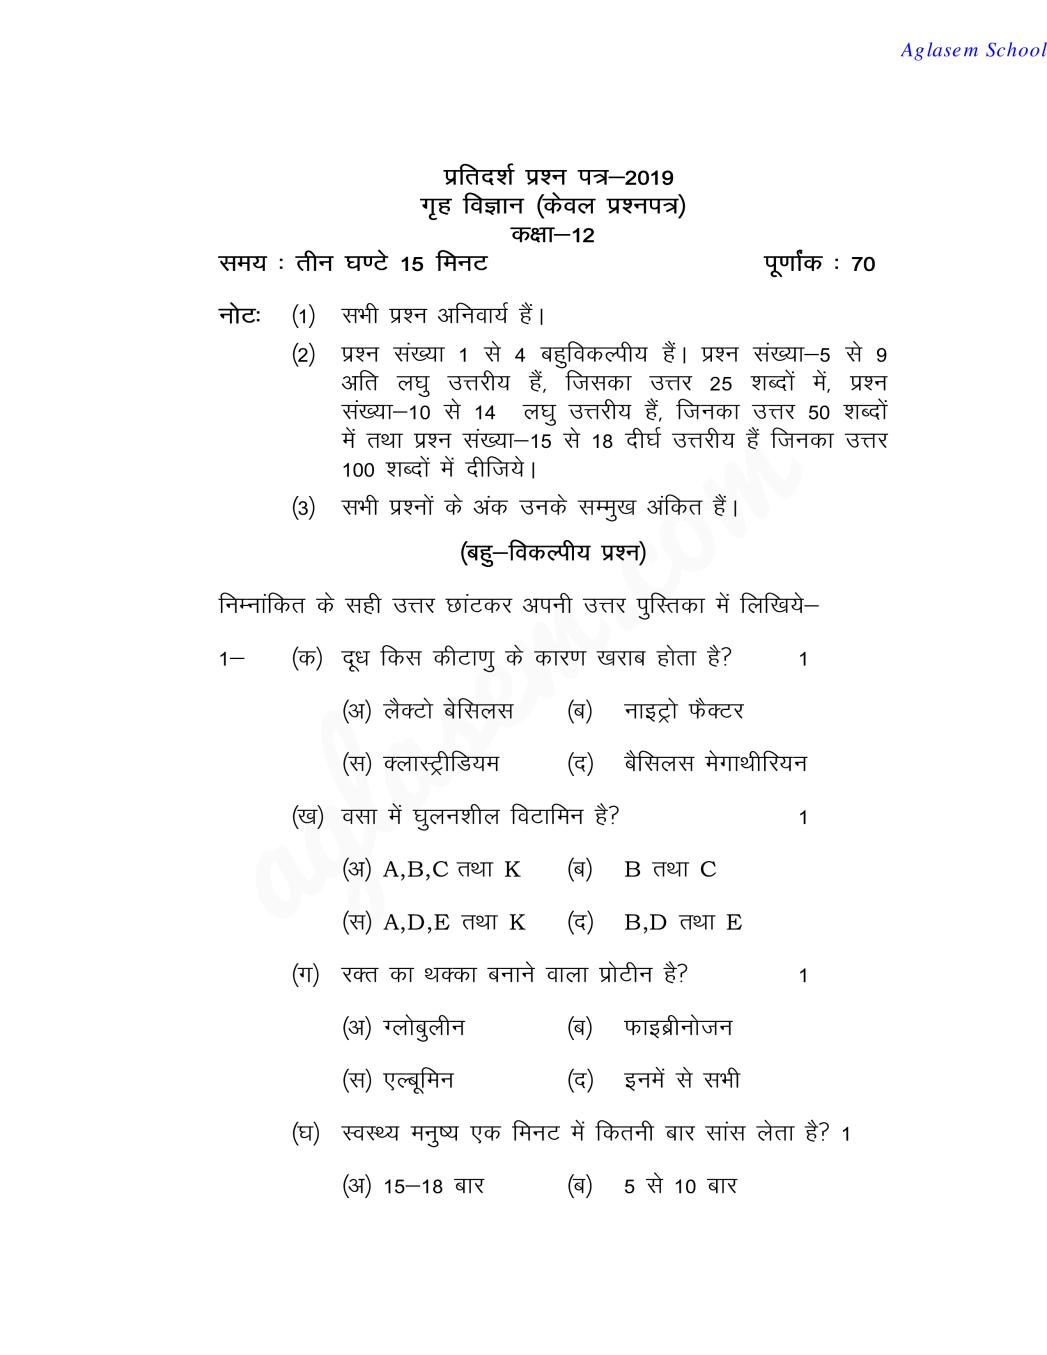 UP Board Class 12 Model Paper 2019 HOME SCIENCE - Page 1